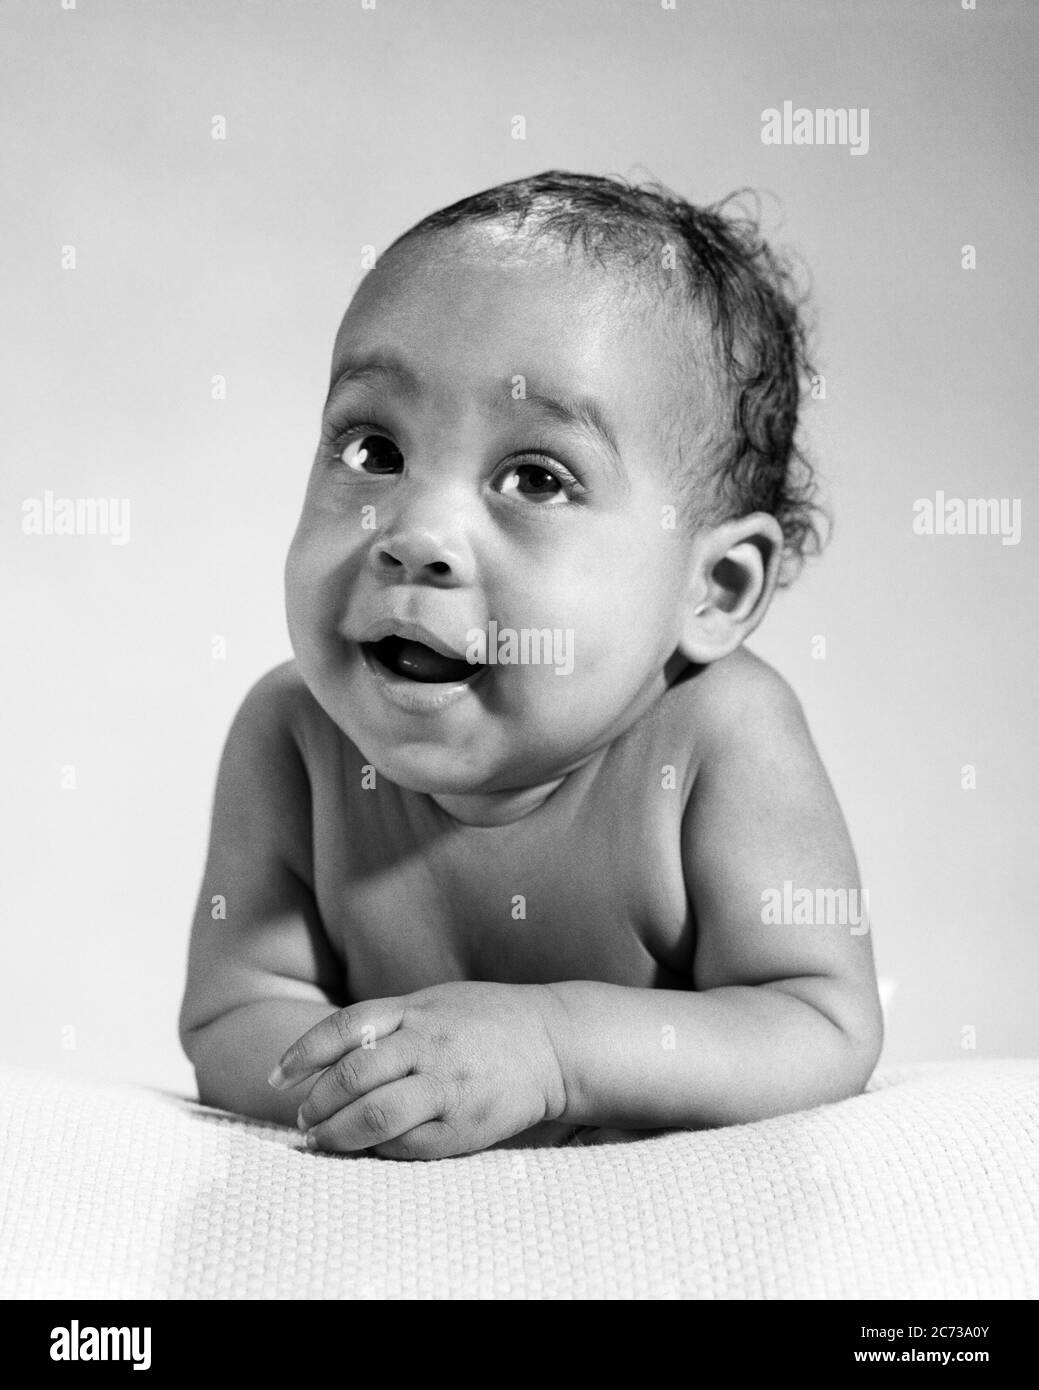 1960s AFRICAN-AMERICAN BABY ARMS FOLDED IN FRONT LOOKING AT CAMERA DIRECTLY - n2311 HAR001 HARS EXPRESSIONS B&W EYE CONTACT HAPPINESS WELLNESS HEAD AND SHOULDERS AFRICAN-AMERICANS AFRICAN-AMERICAN BLACK ETHNICITY PRIDE DIRECTLY CONNECTION CONCEPTUAL BABY BOY GROWTH JUVENILES BLACK AND WHITE HAR001 OLD FASHIONED AFRICAN AMERICANS Stock Photo